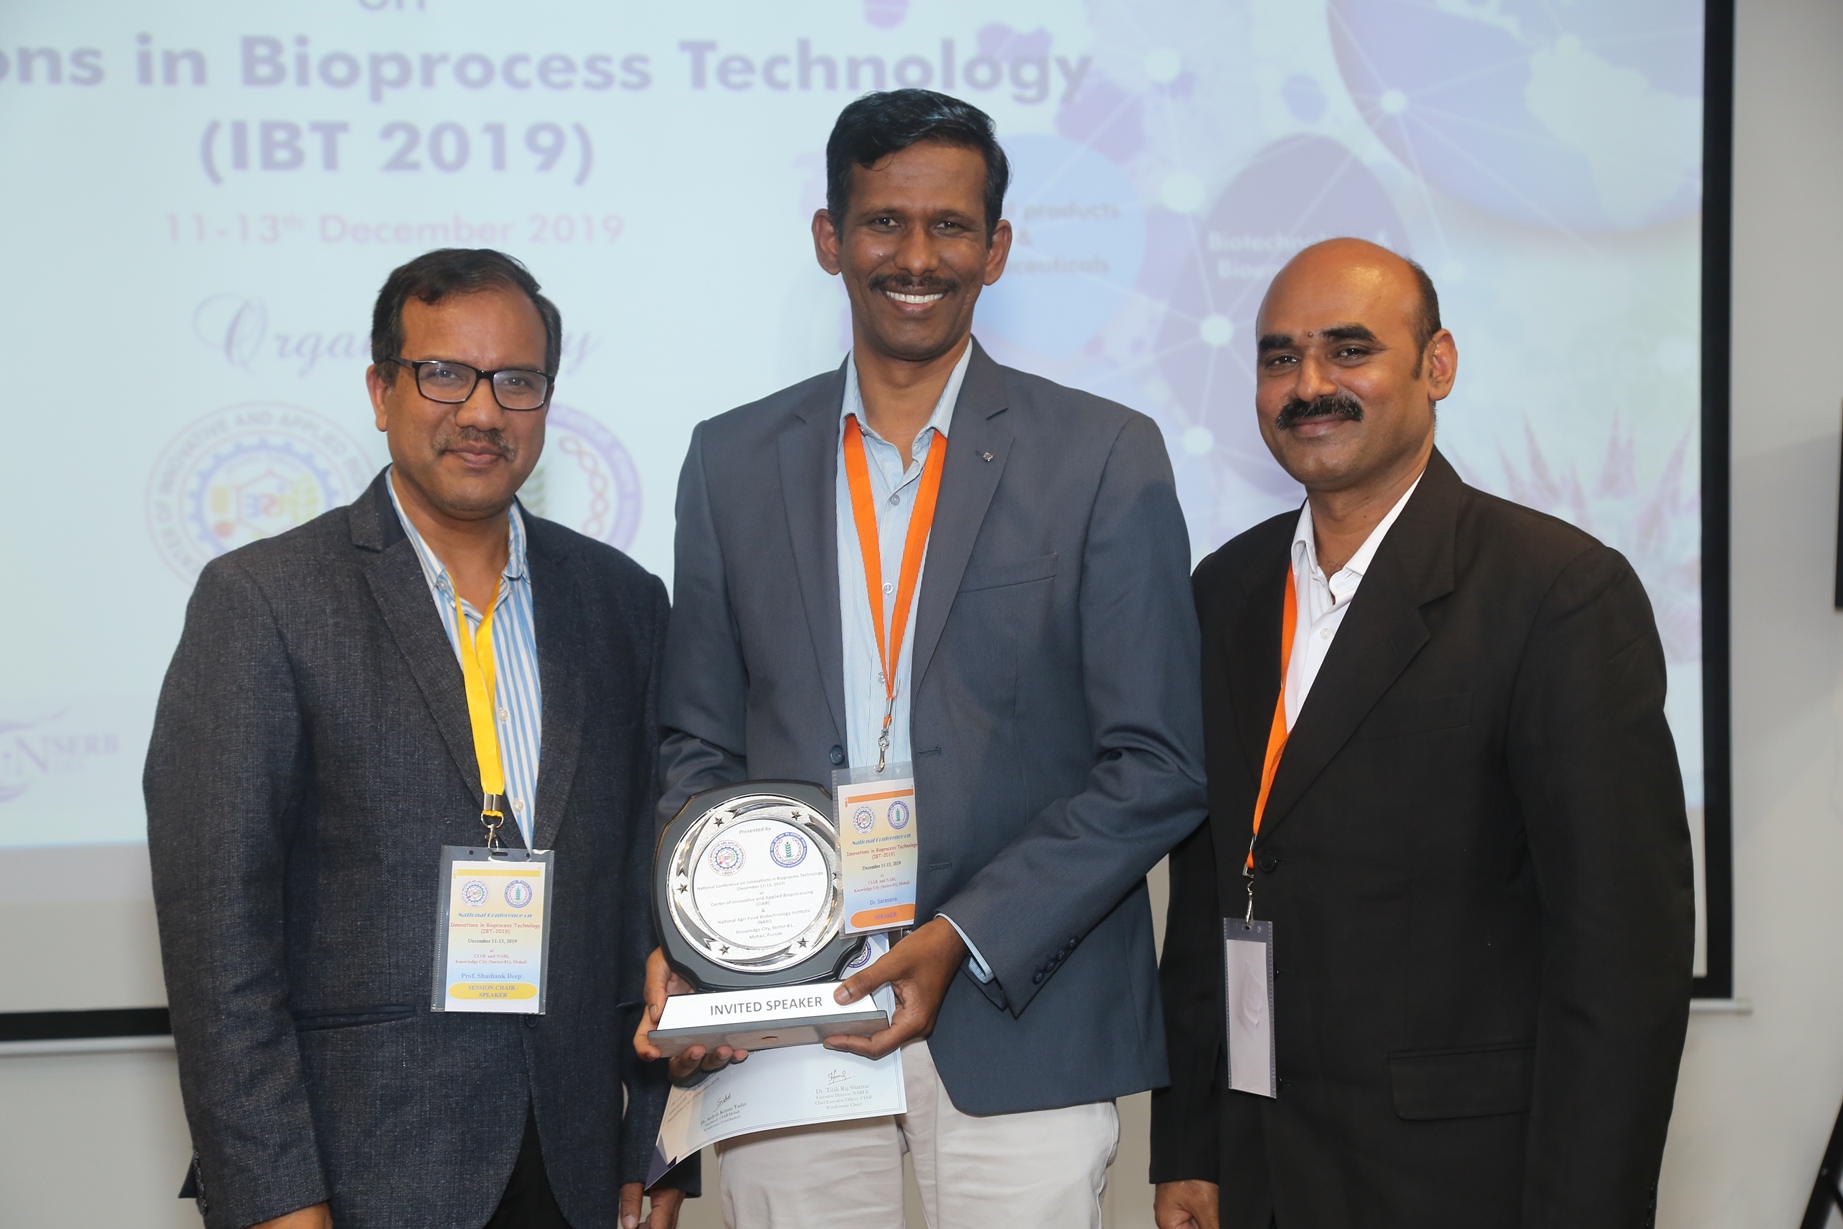 Innovations in Bioprocess Technology (IBT-2019)